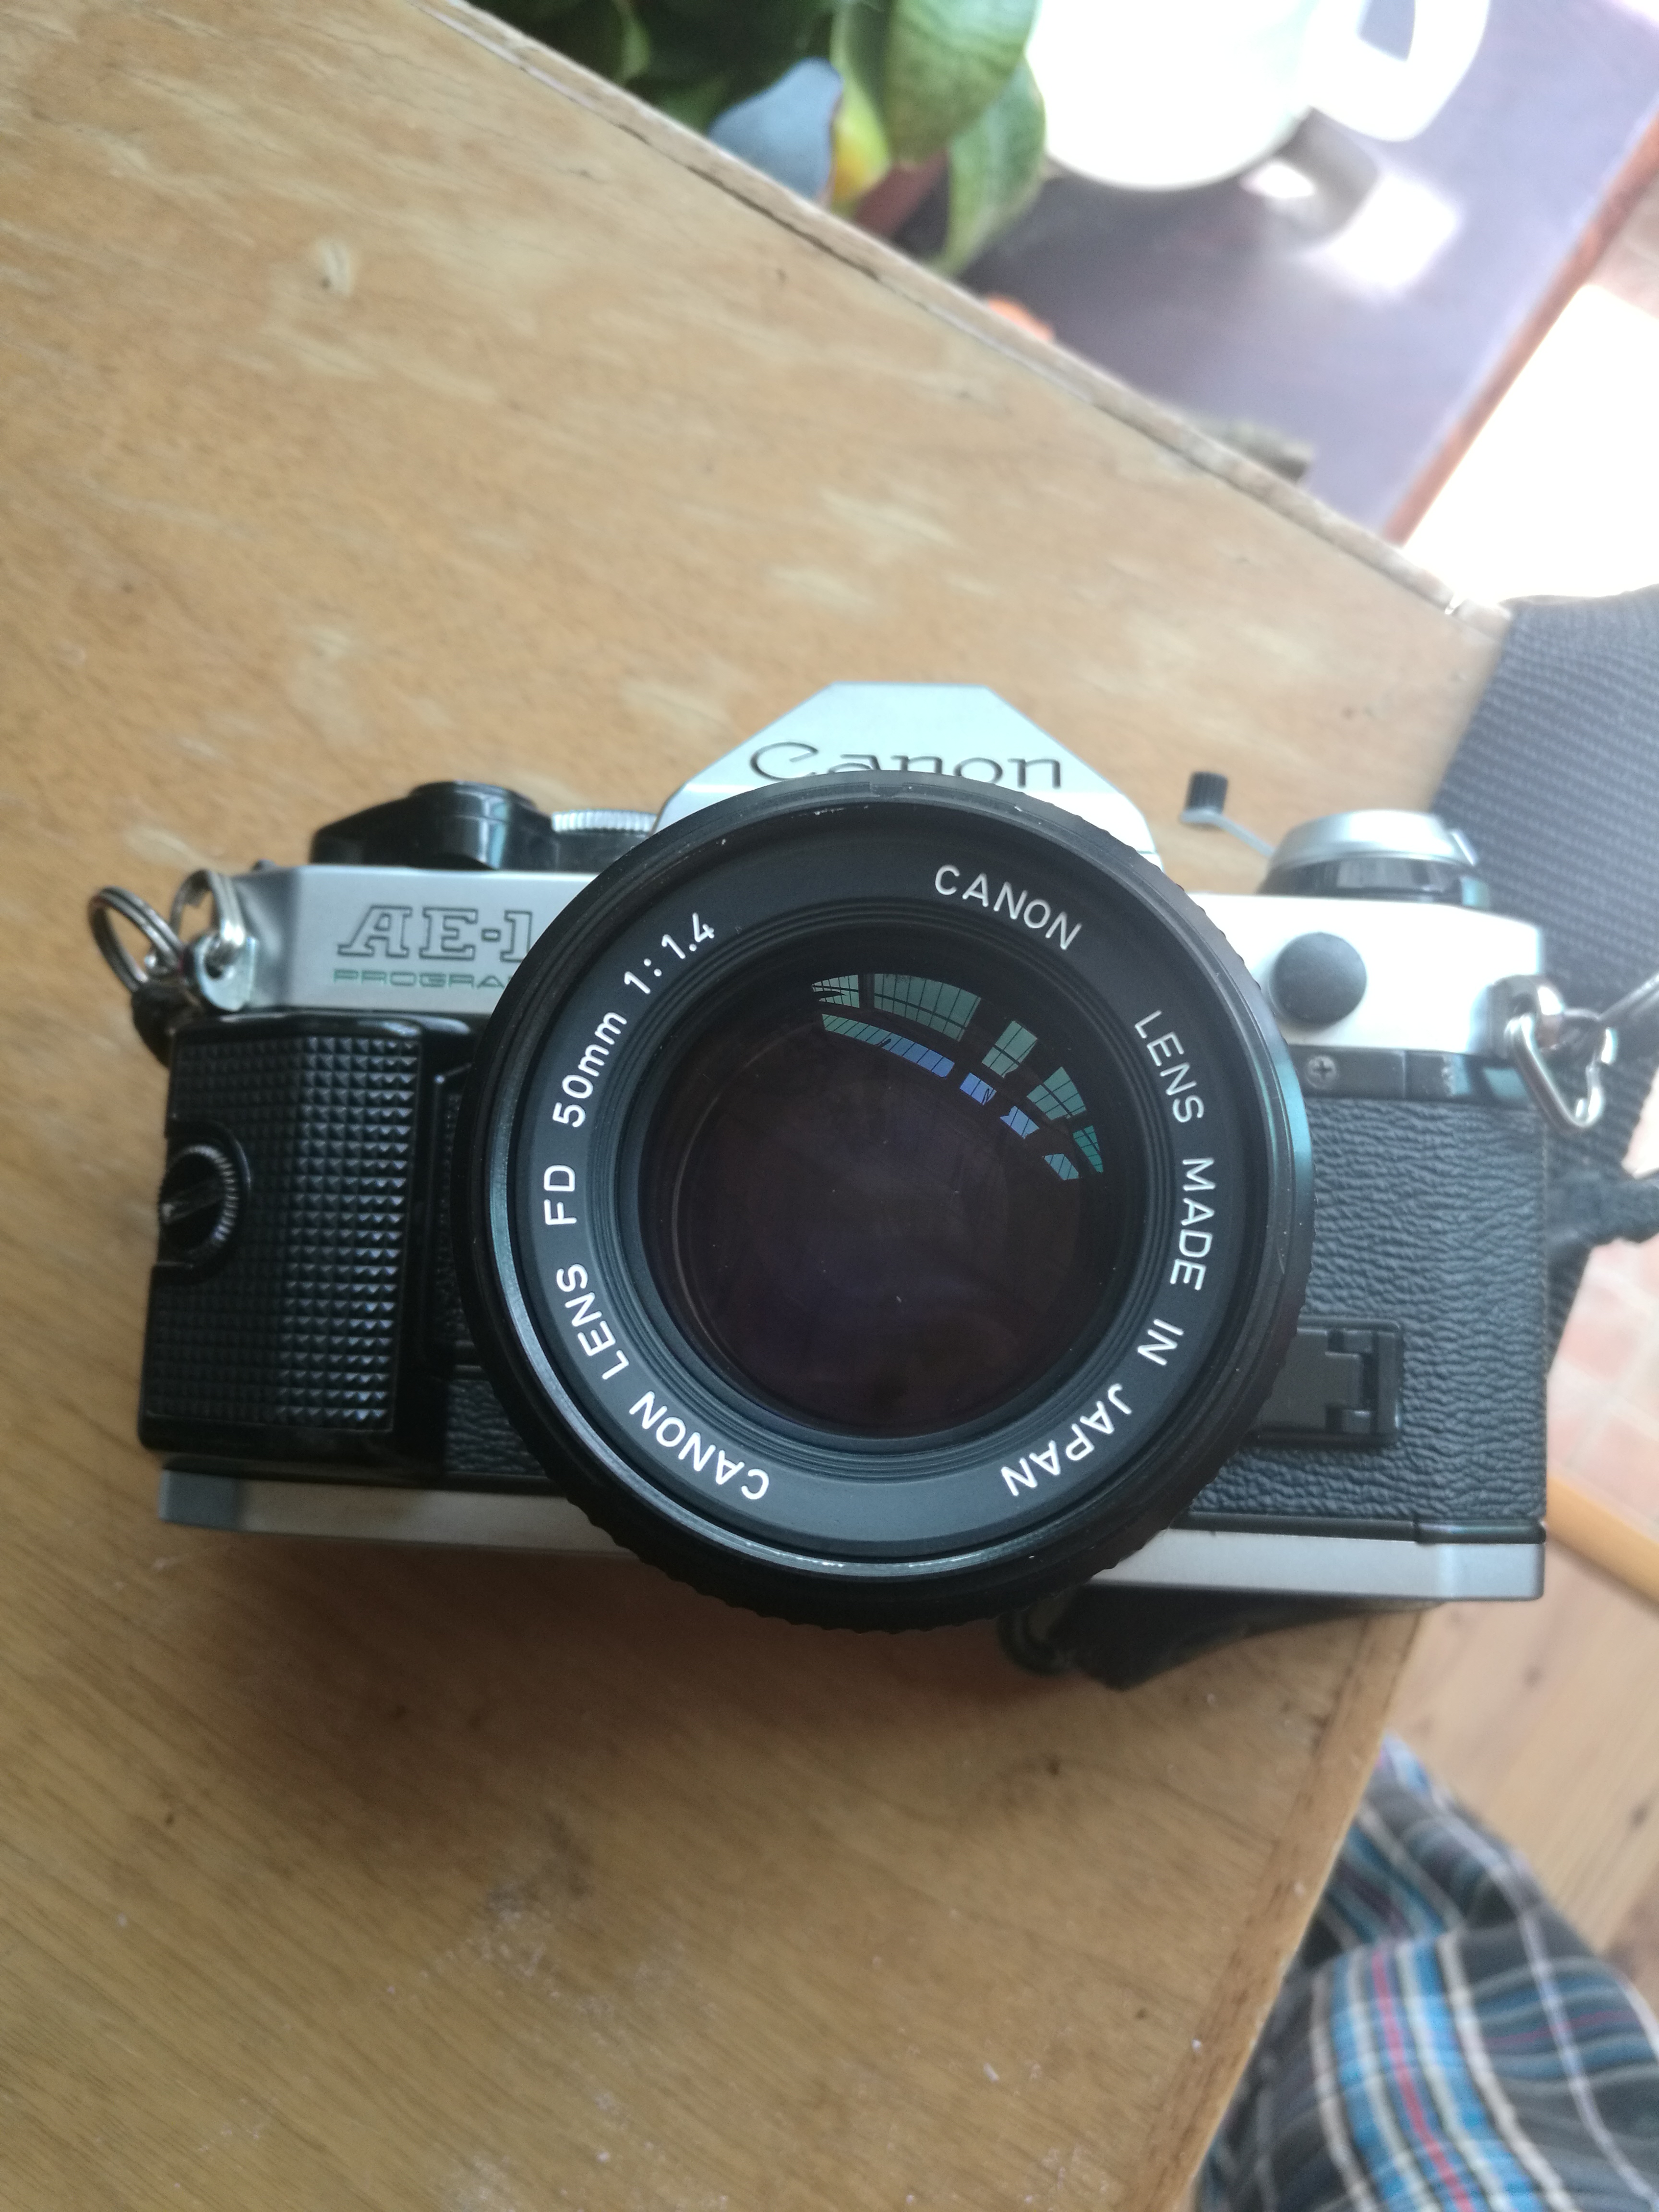  Canon AE-1 P with Canon FD50mm/F1.4 and Tenglong 28-80 lens